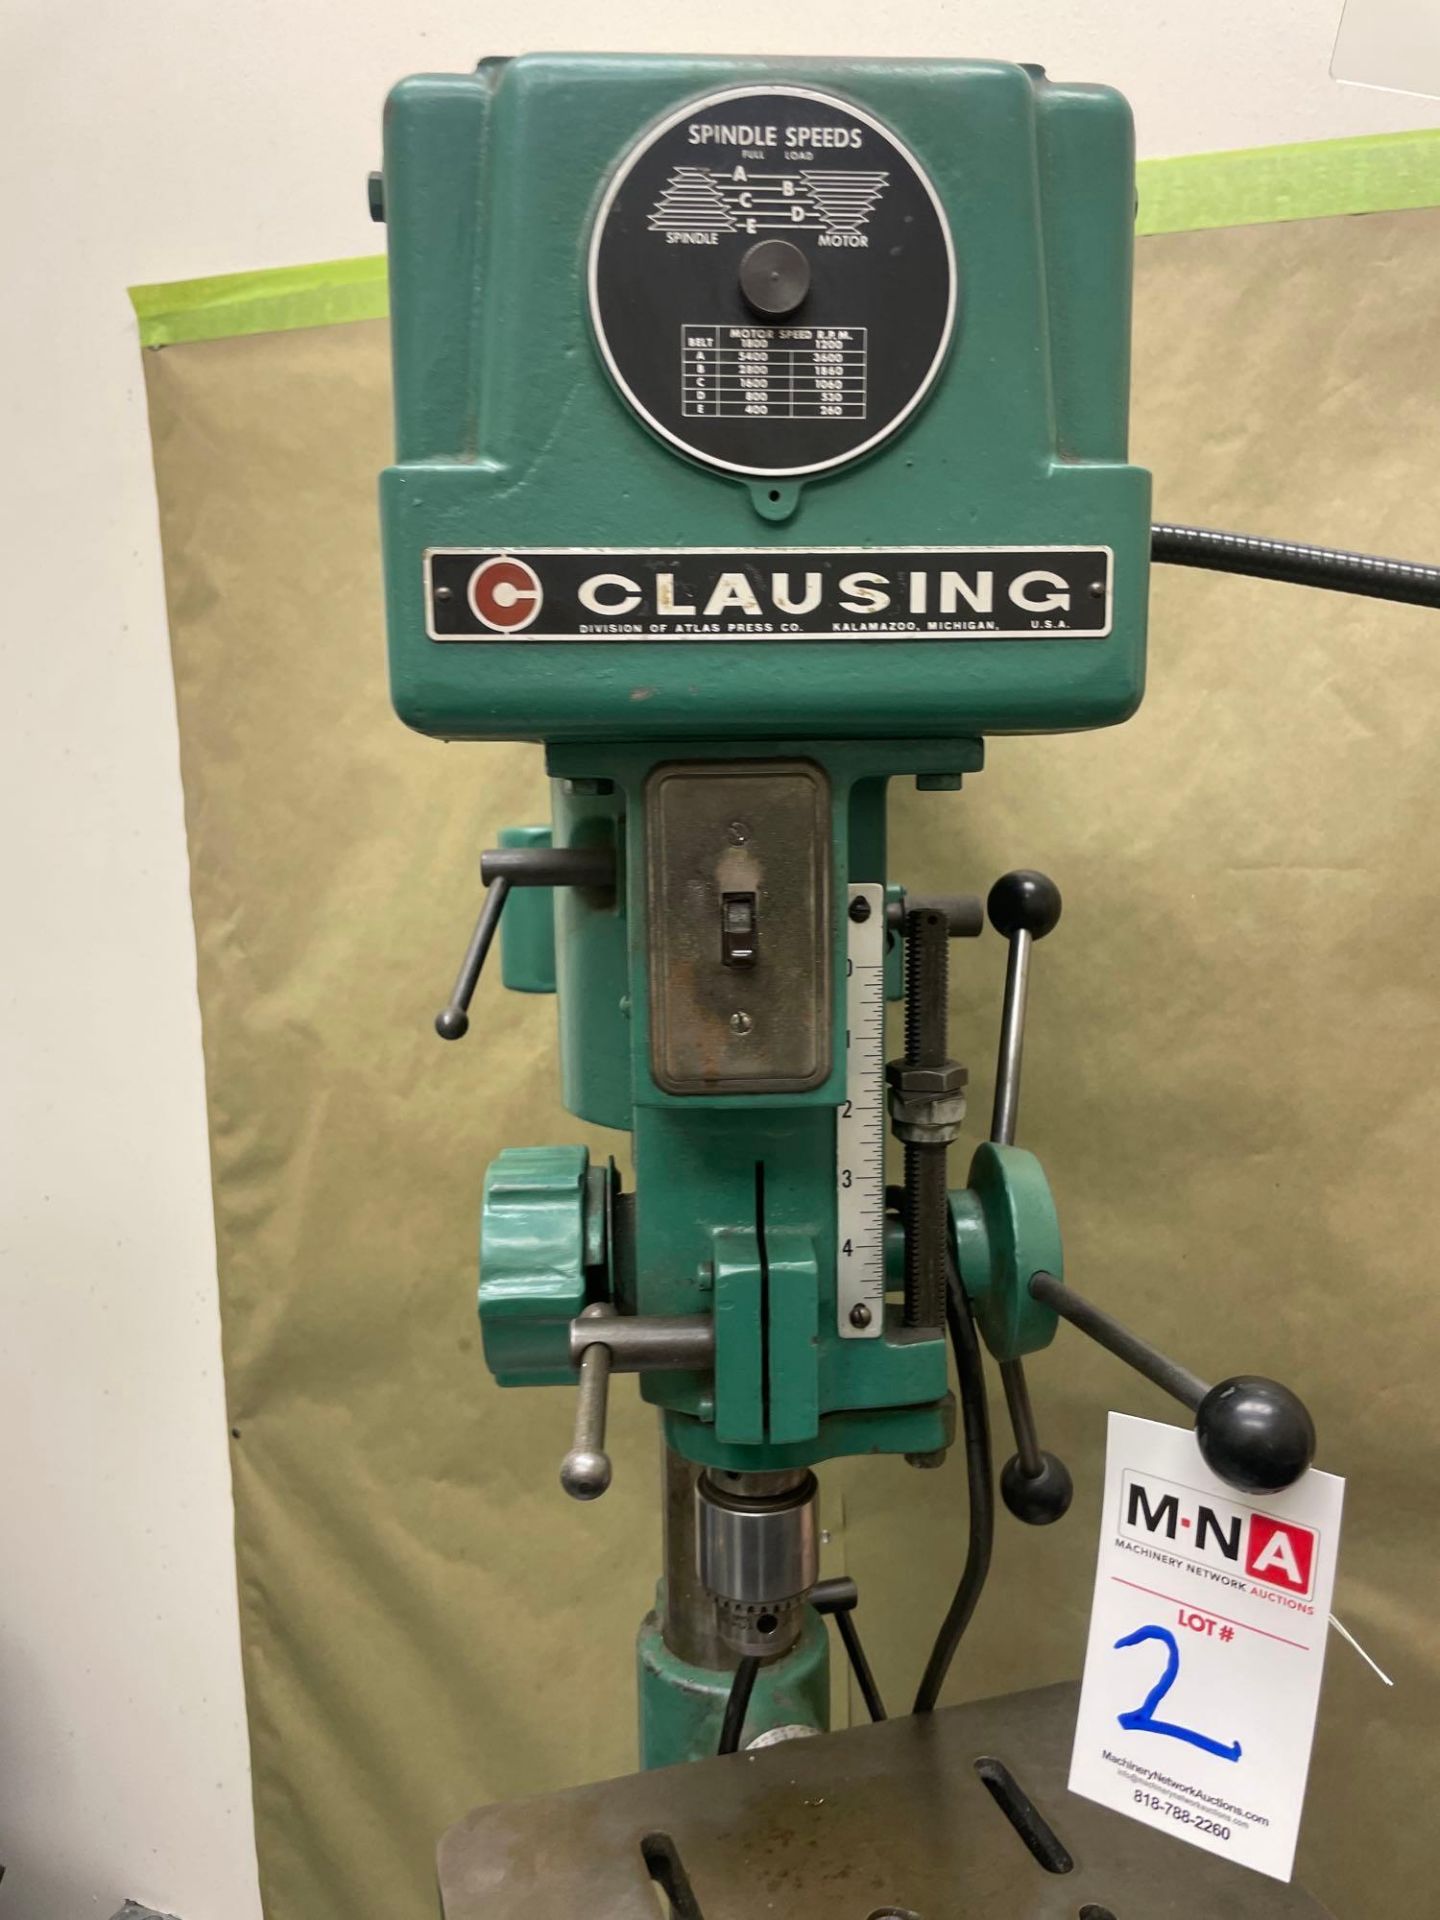 Clausing 165C 16" Floor Model Drill Press, s/n 111127 - Image 5 of 6